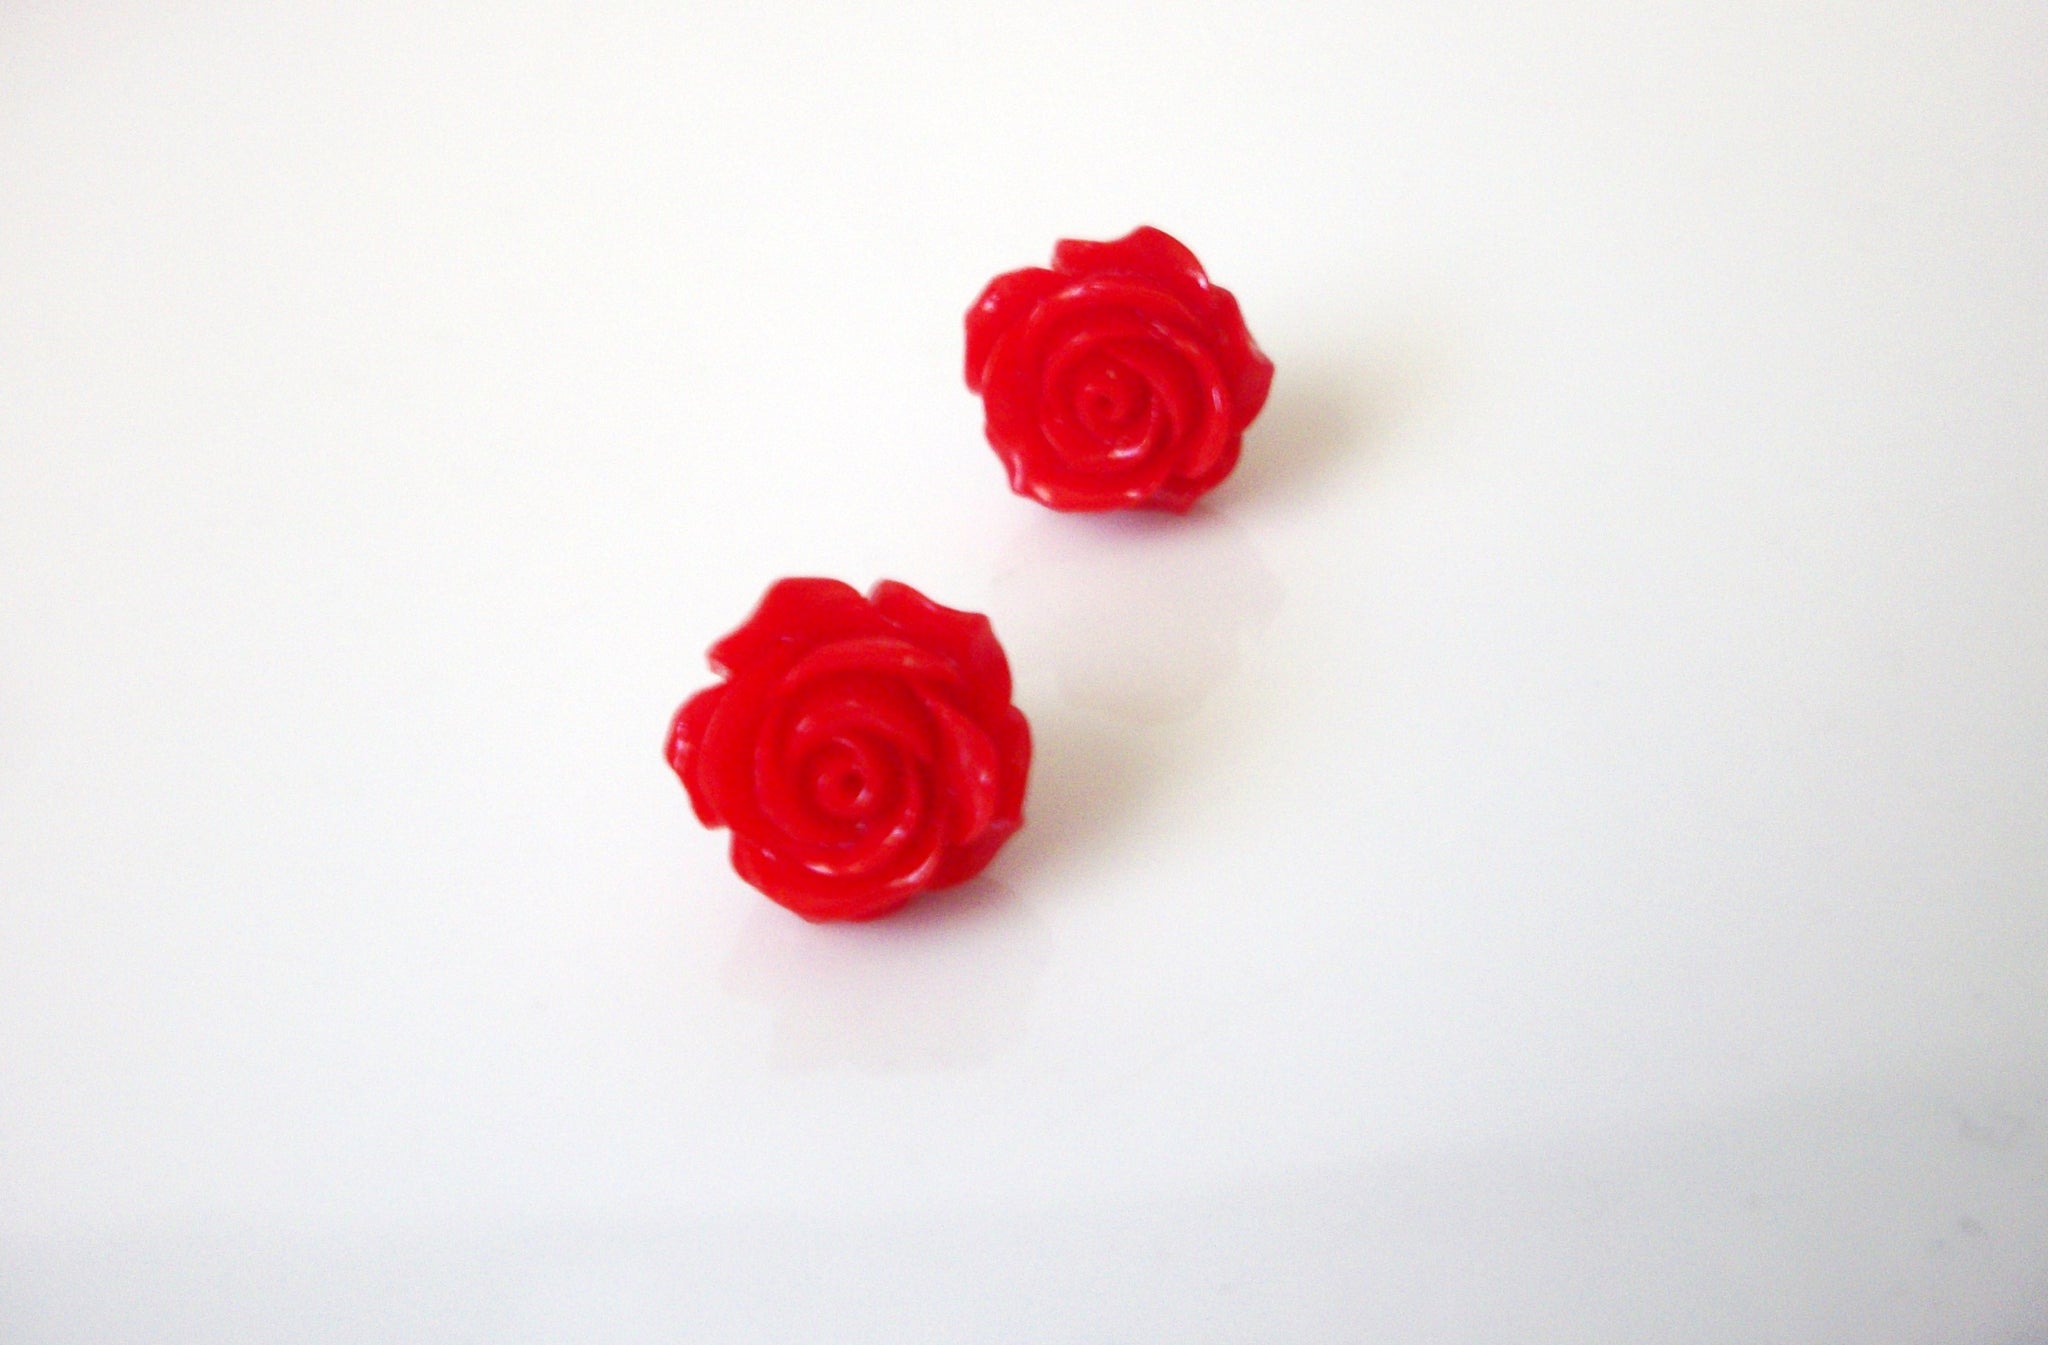 Vintage Cellulose Rose Stud Small Earrings 40220